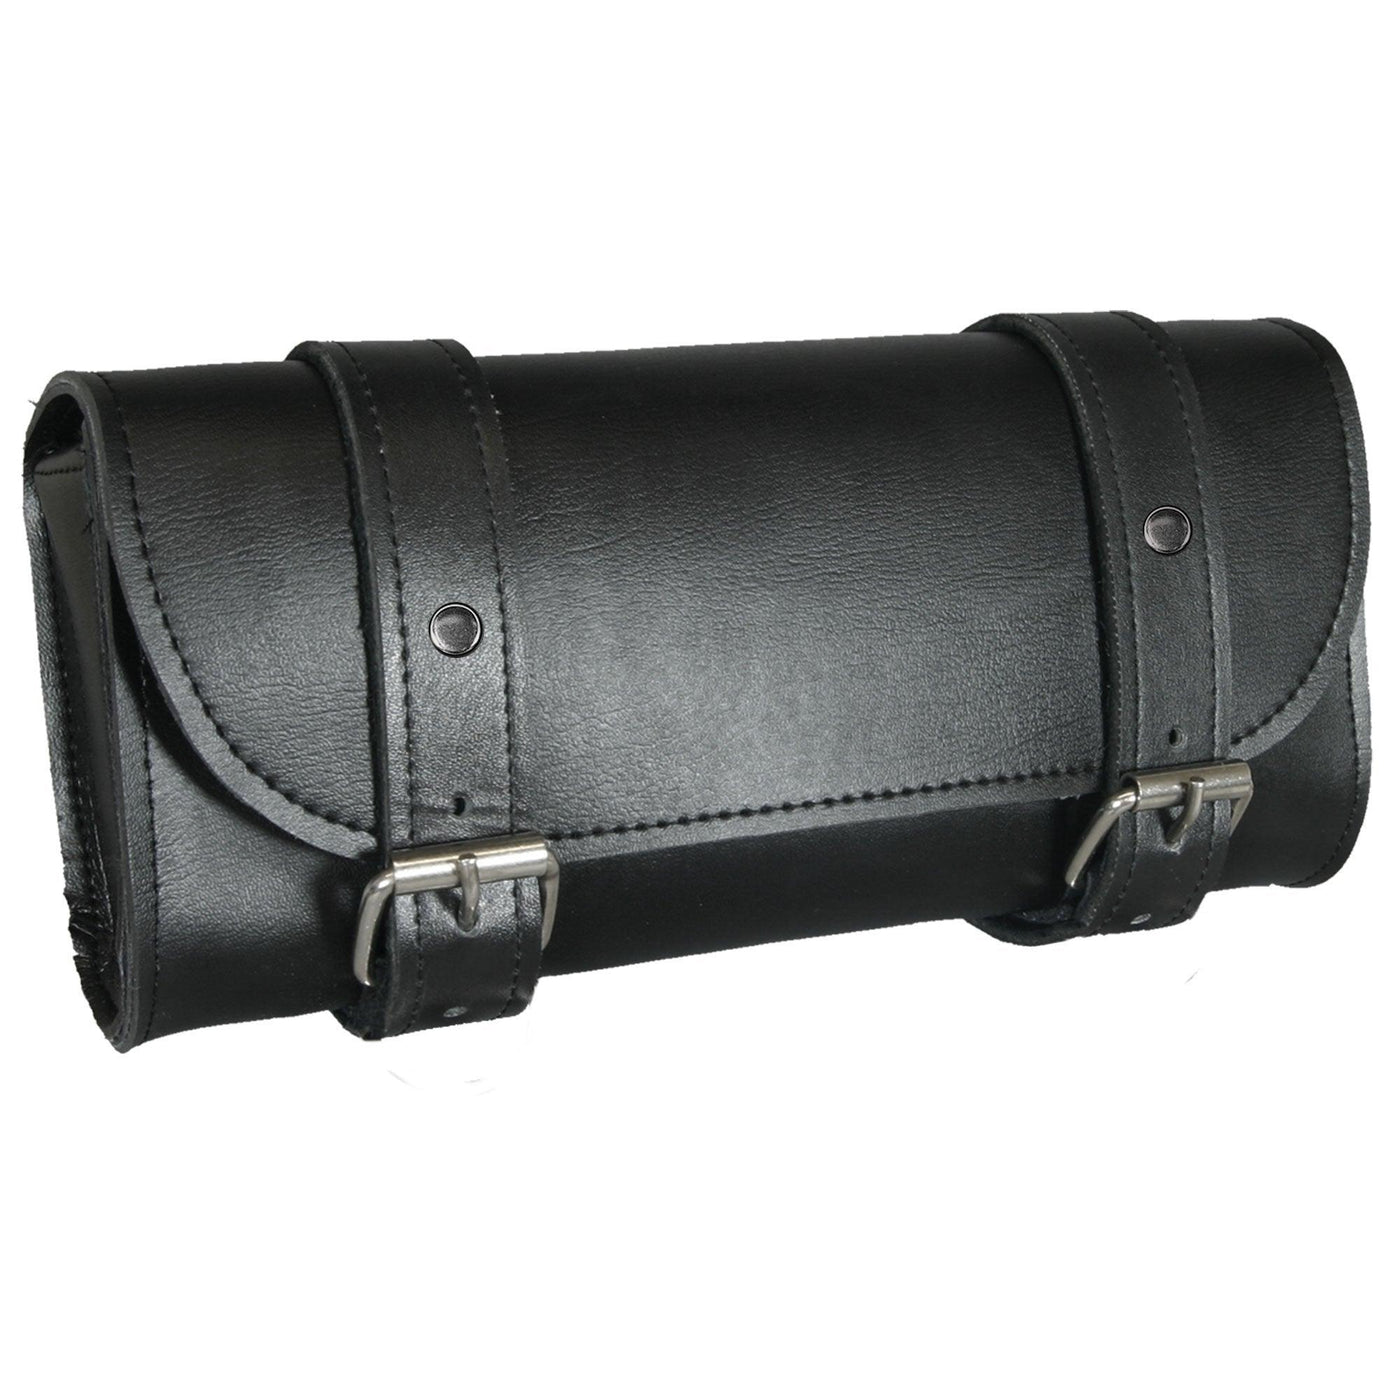 Hot Leathers Large Pvc Tool Bag - American Legend Rider